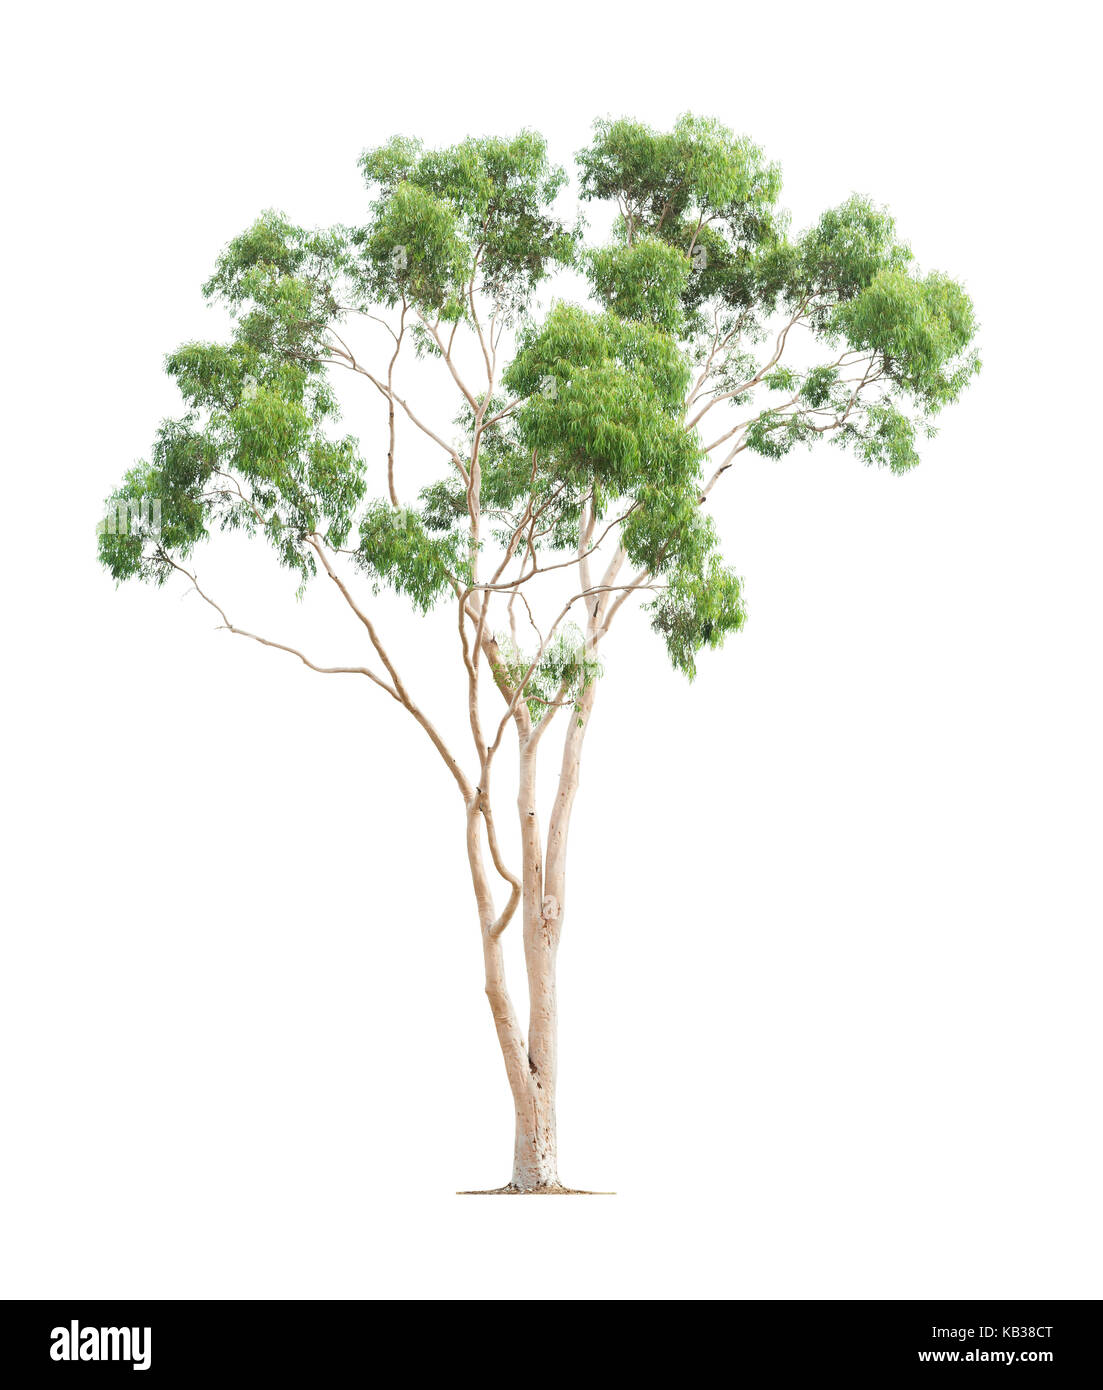 Green beautiful and tall eucalyptus tree isolated on white background Stock Photo